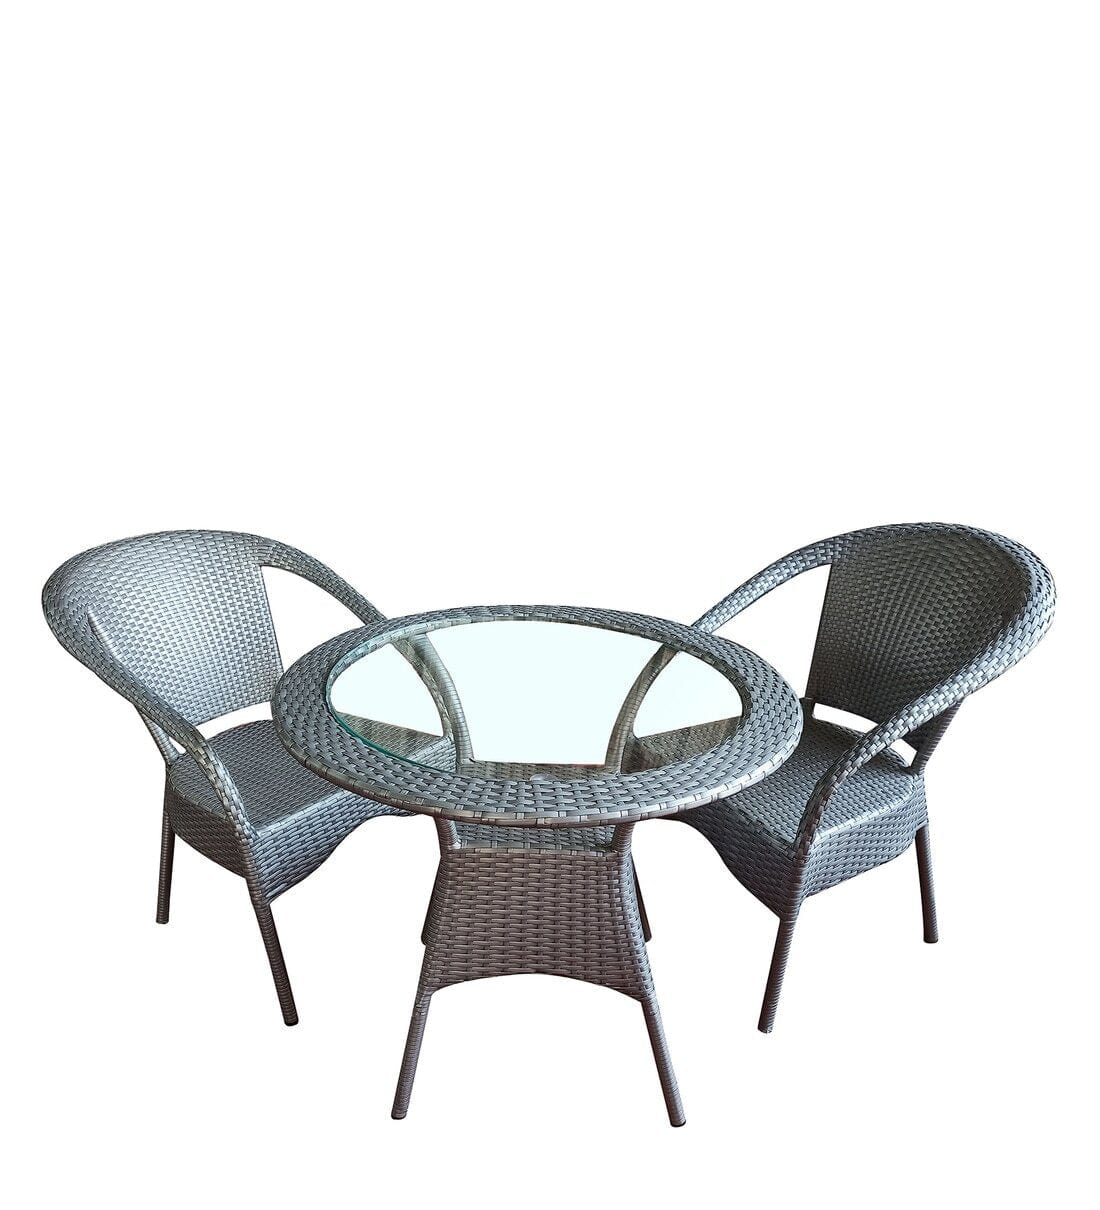 Dreamline Outdoor Garden/Balcony Patio Seating Set 1+4, 4 Chairs And Table Set (Silver)